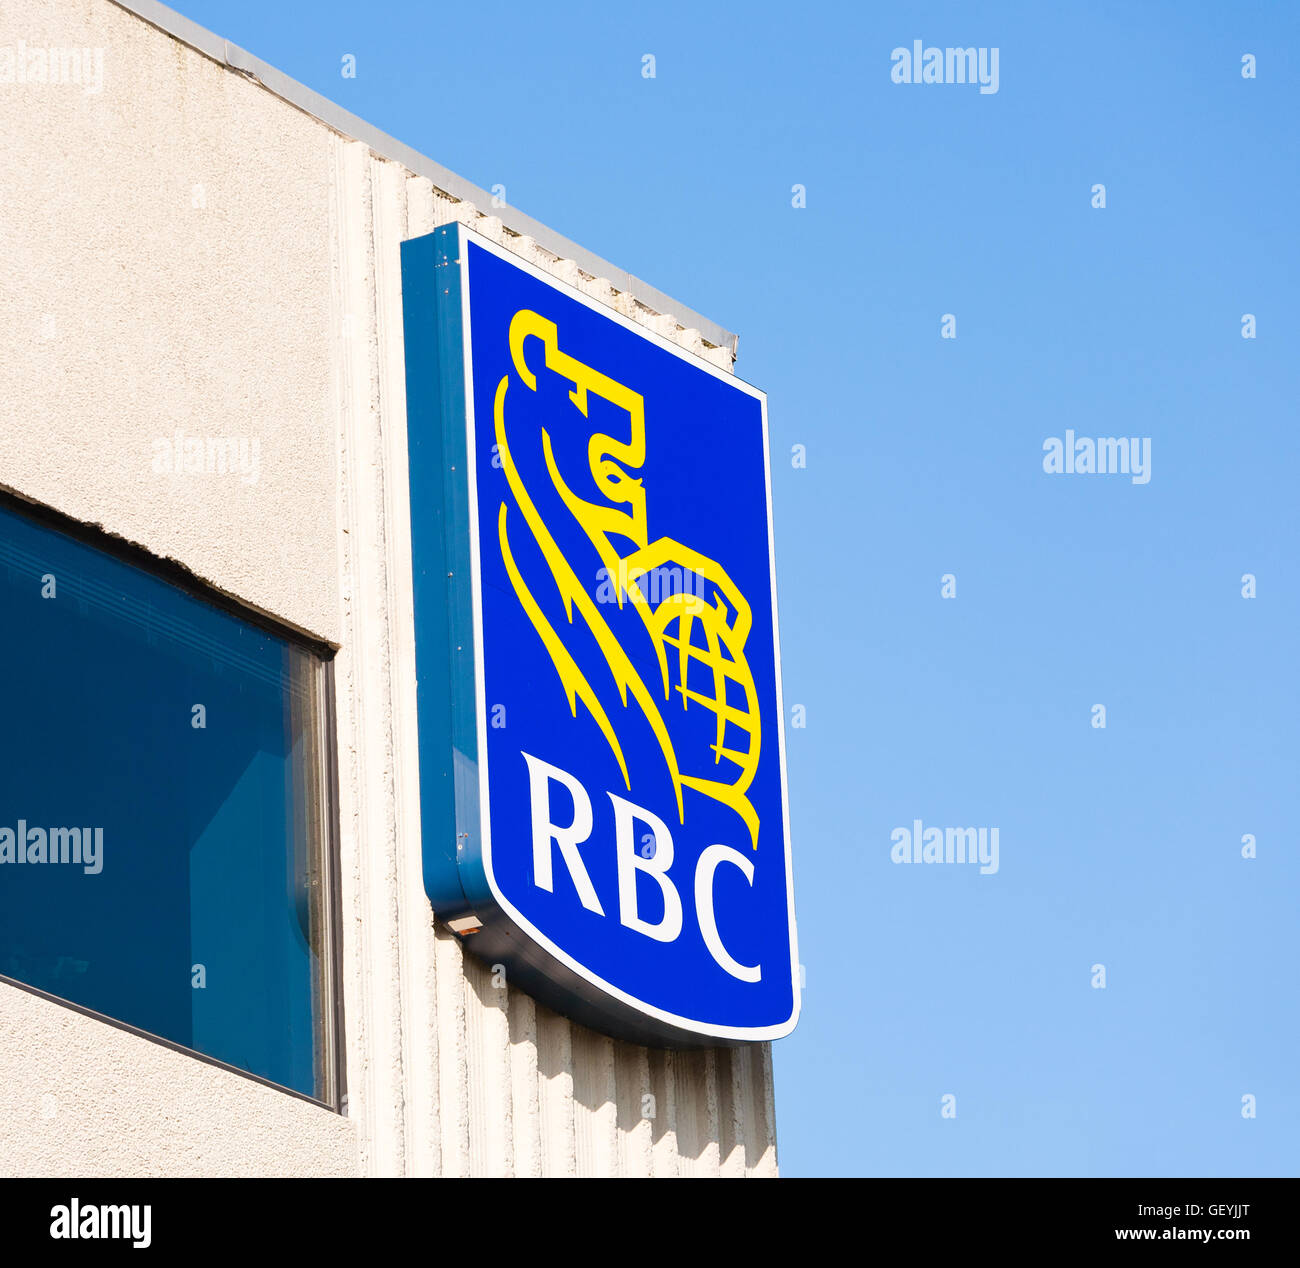 BURNSIDE, CANADA - JUNE 26, 2016: RBC sign on office building. The Royal Bank of Canada, or RBC, is Canada's largest bank. Stock Photo